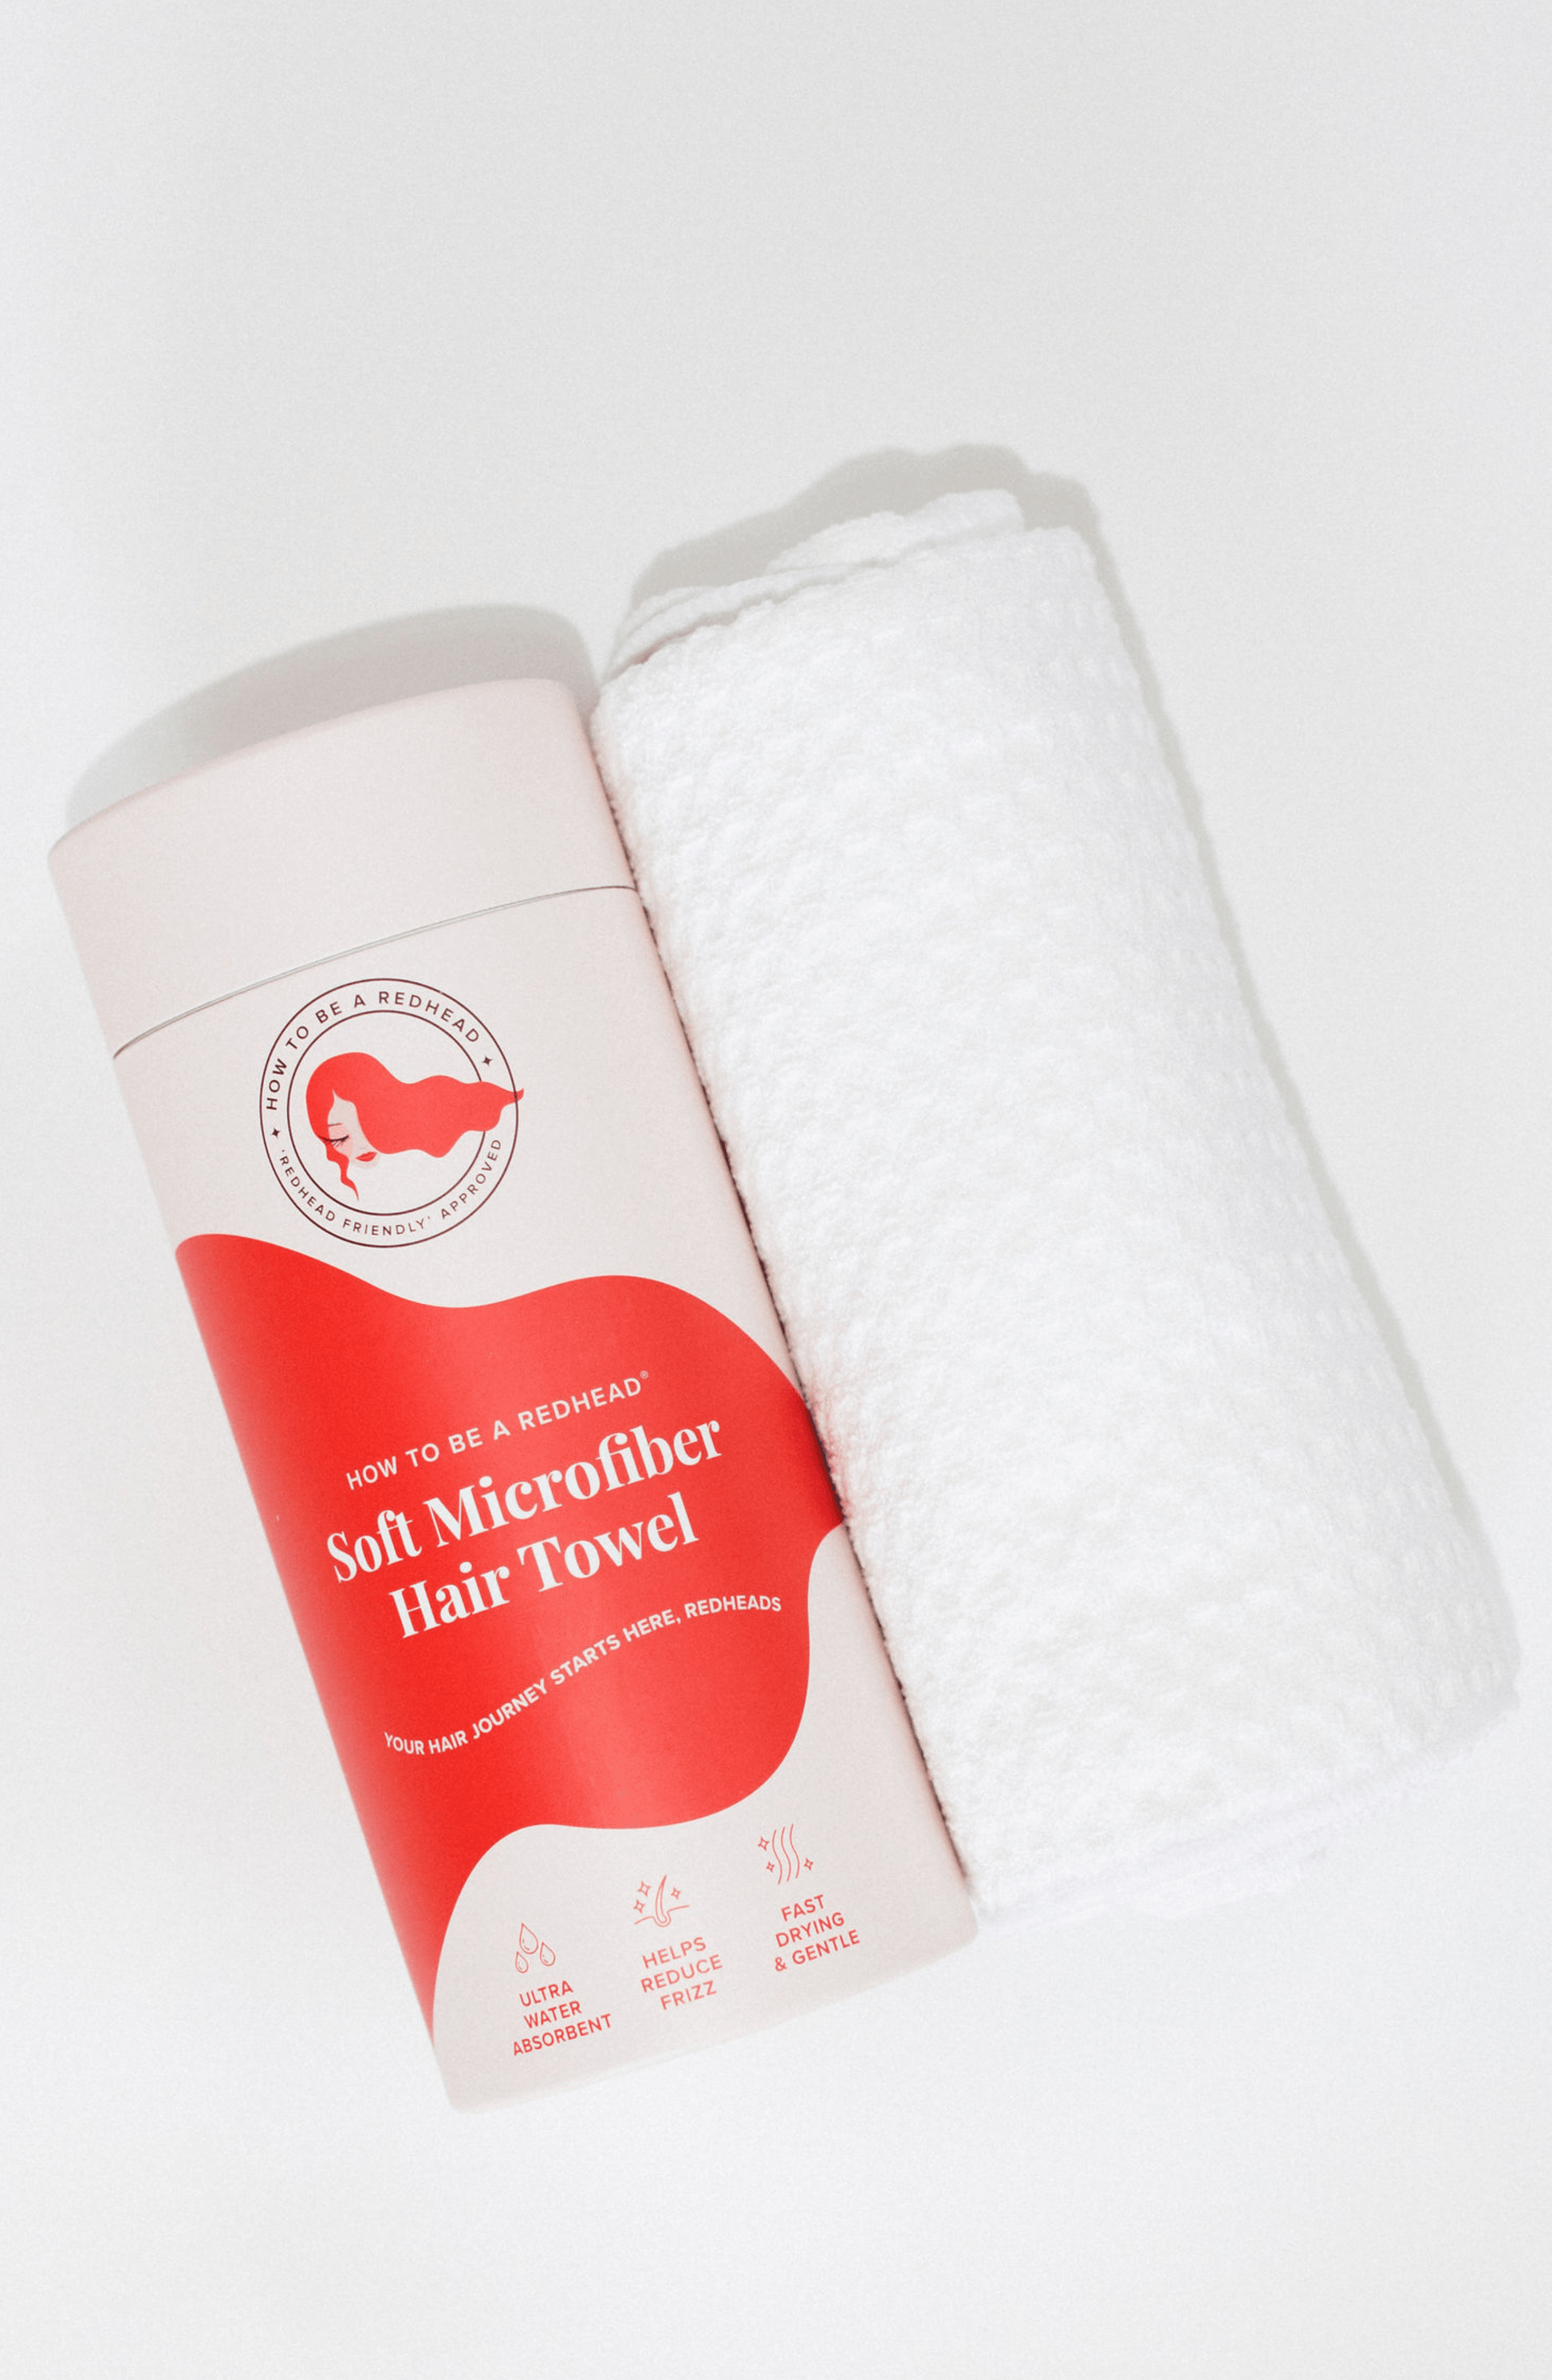 Soft Microfiber Hair Towel for Redheads - Redhead Beauty Products